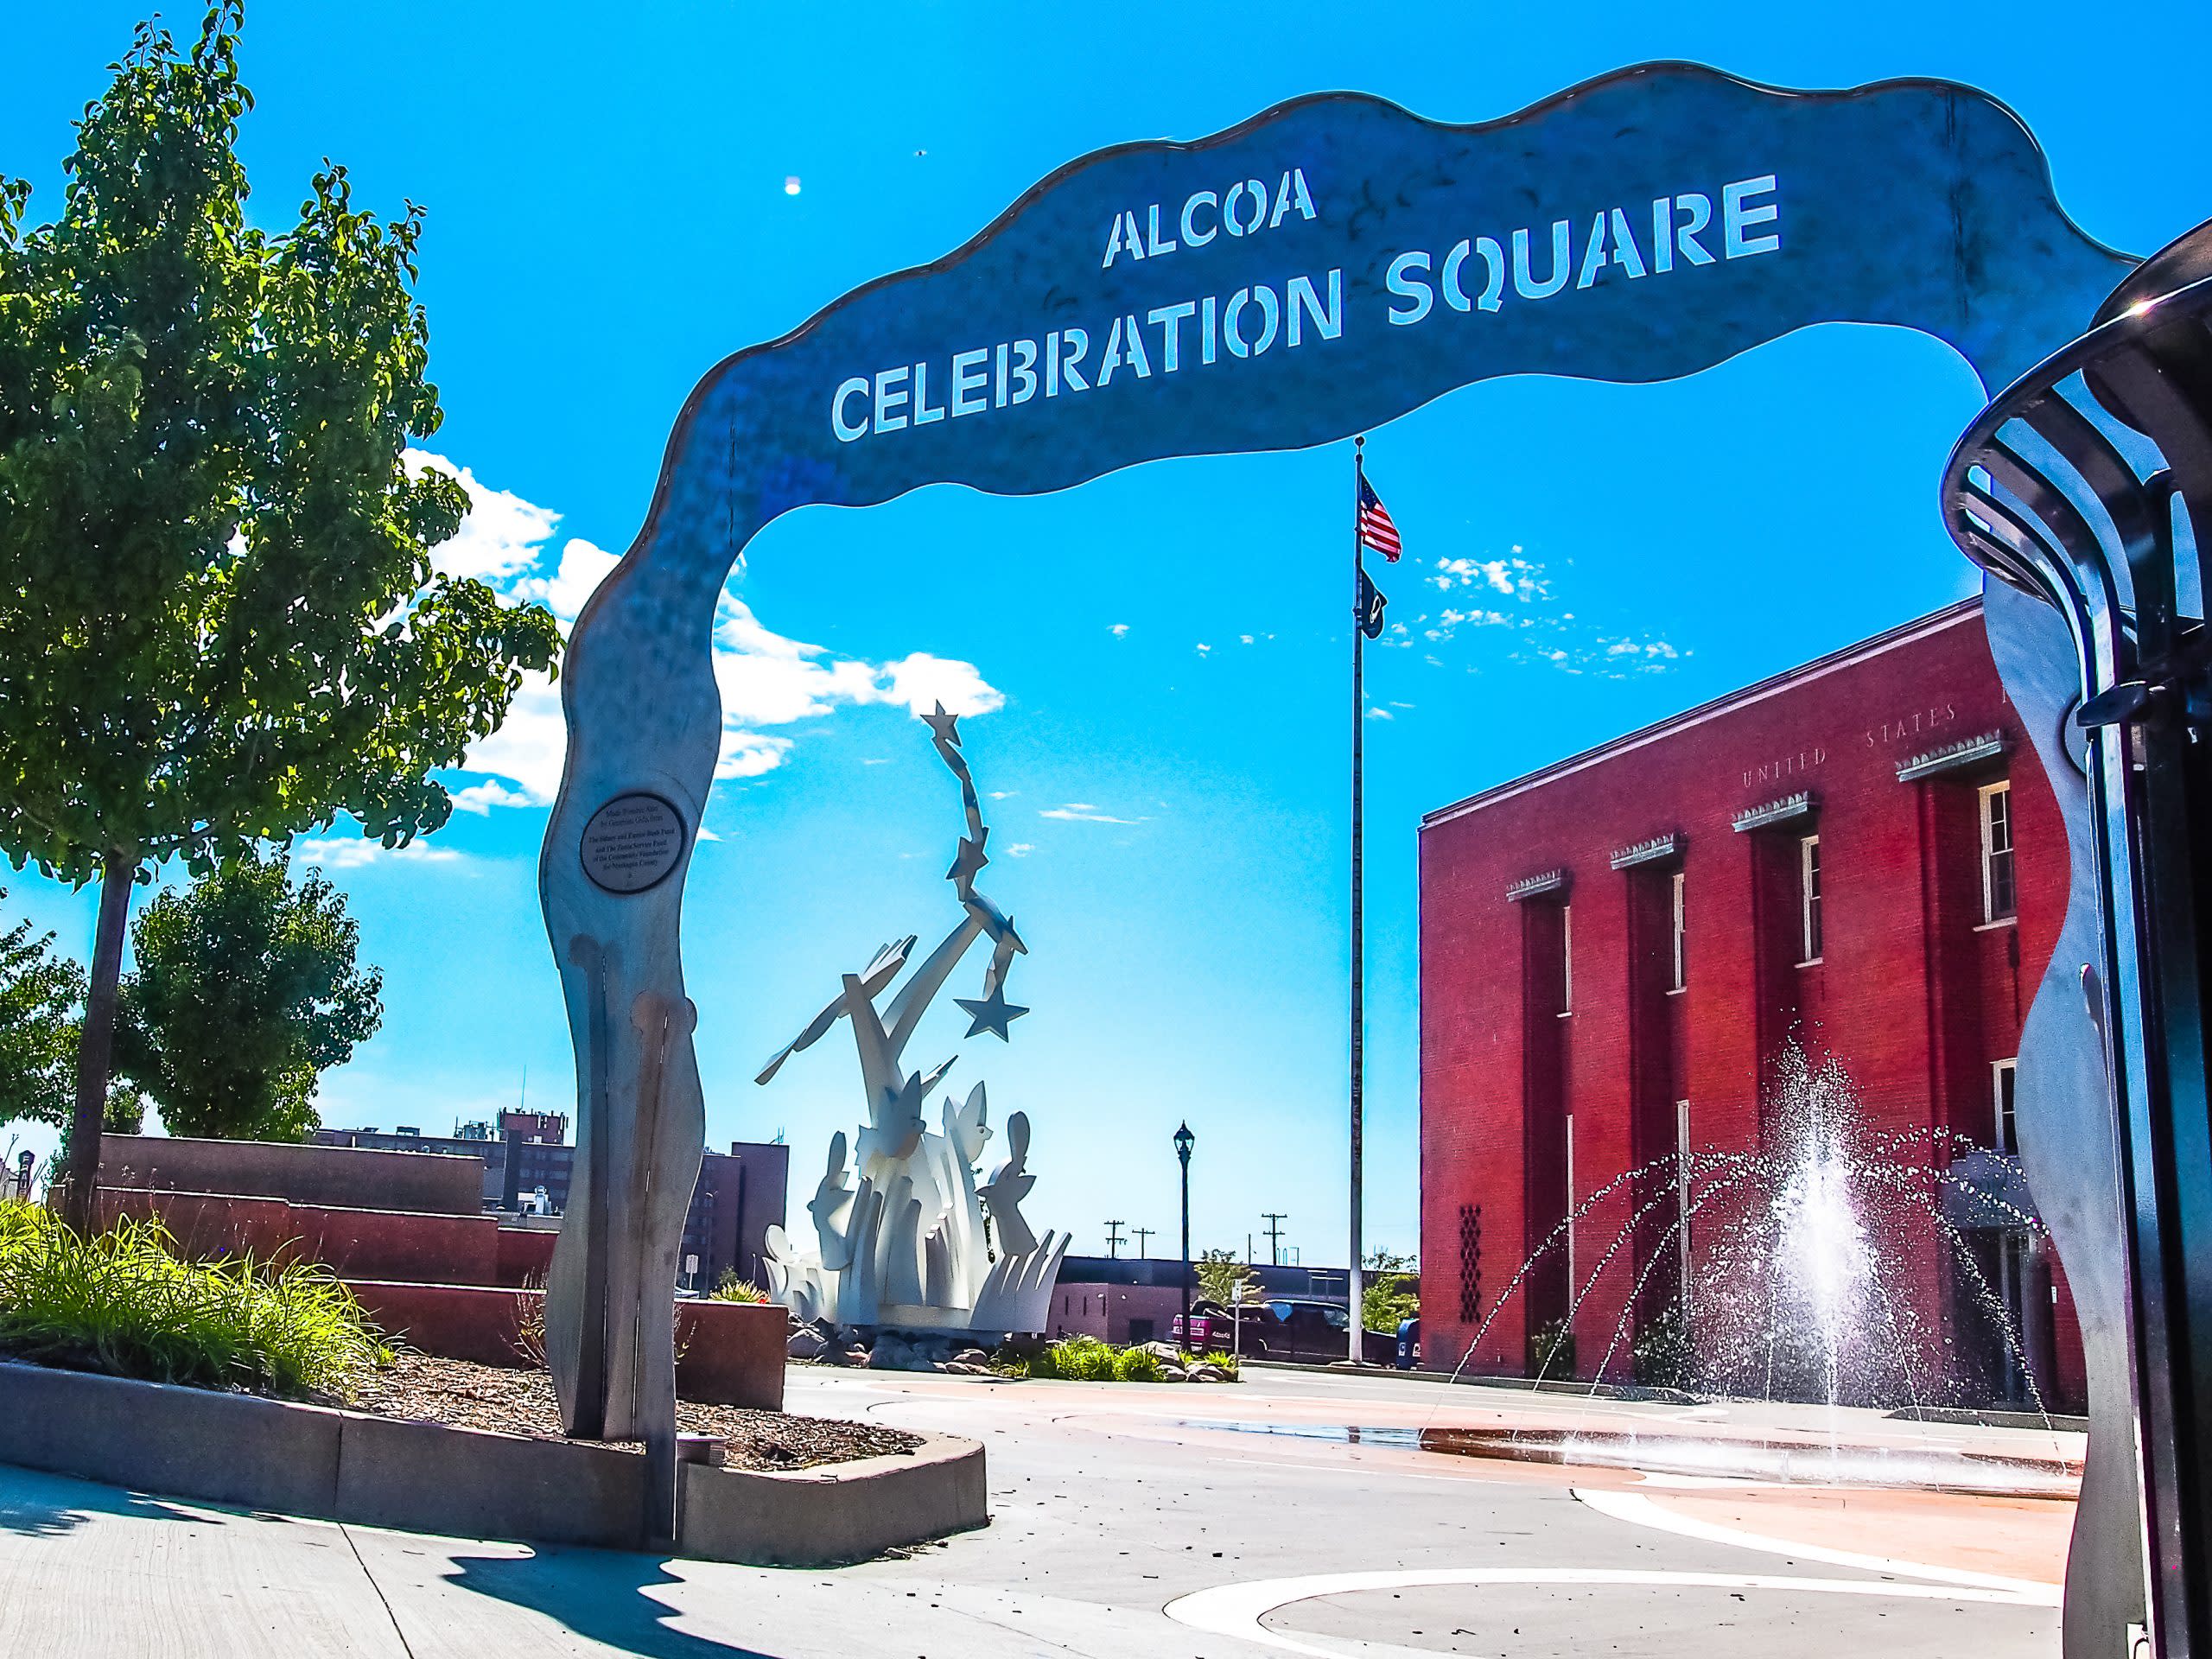 Steel arch entrance with alcoa celebration squre carved at top. red brick building, fountain and white sculpture lay behind. 